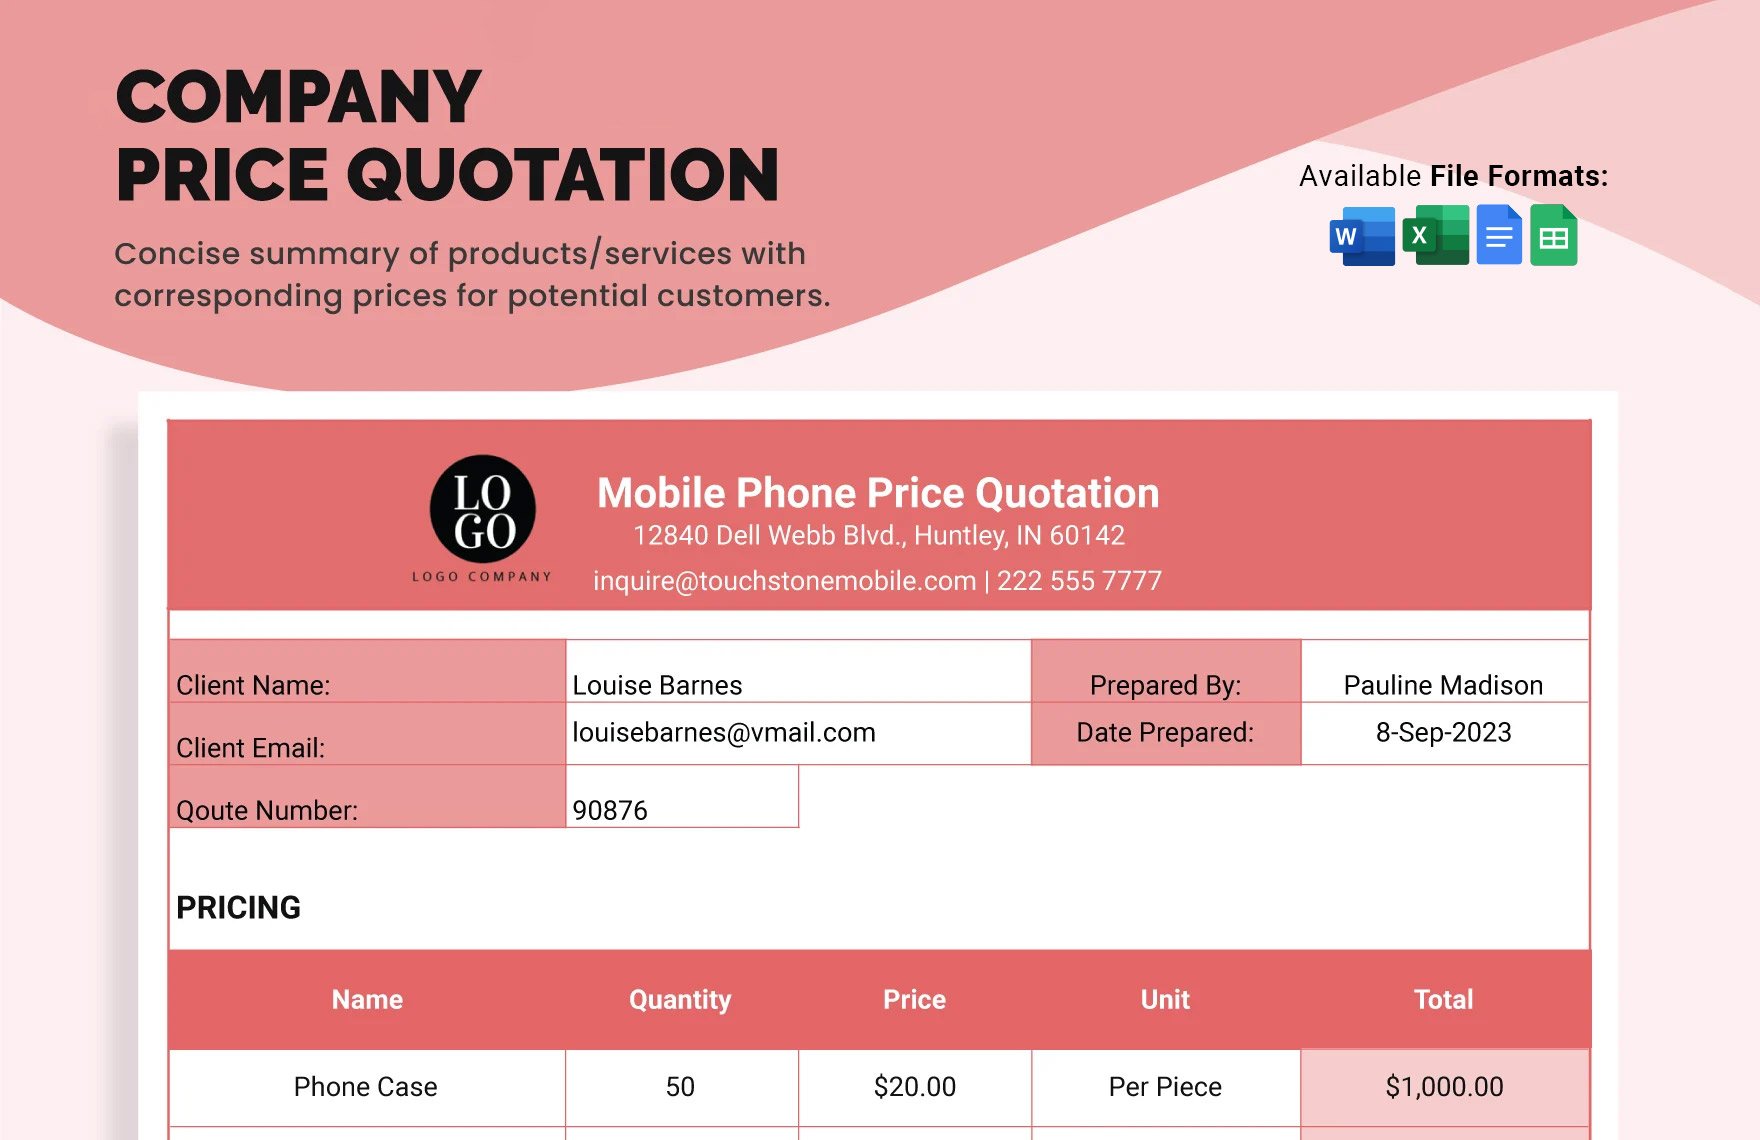 Free Company Price Quotation Template in Word, Google Docs, Excel, Google Sheets